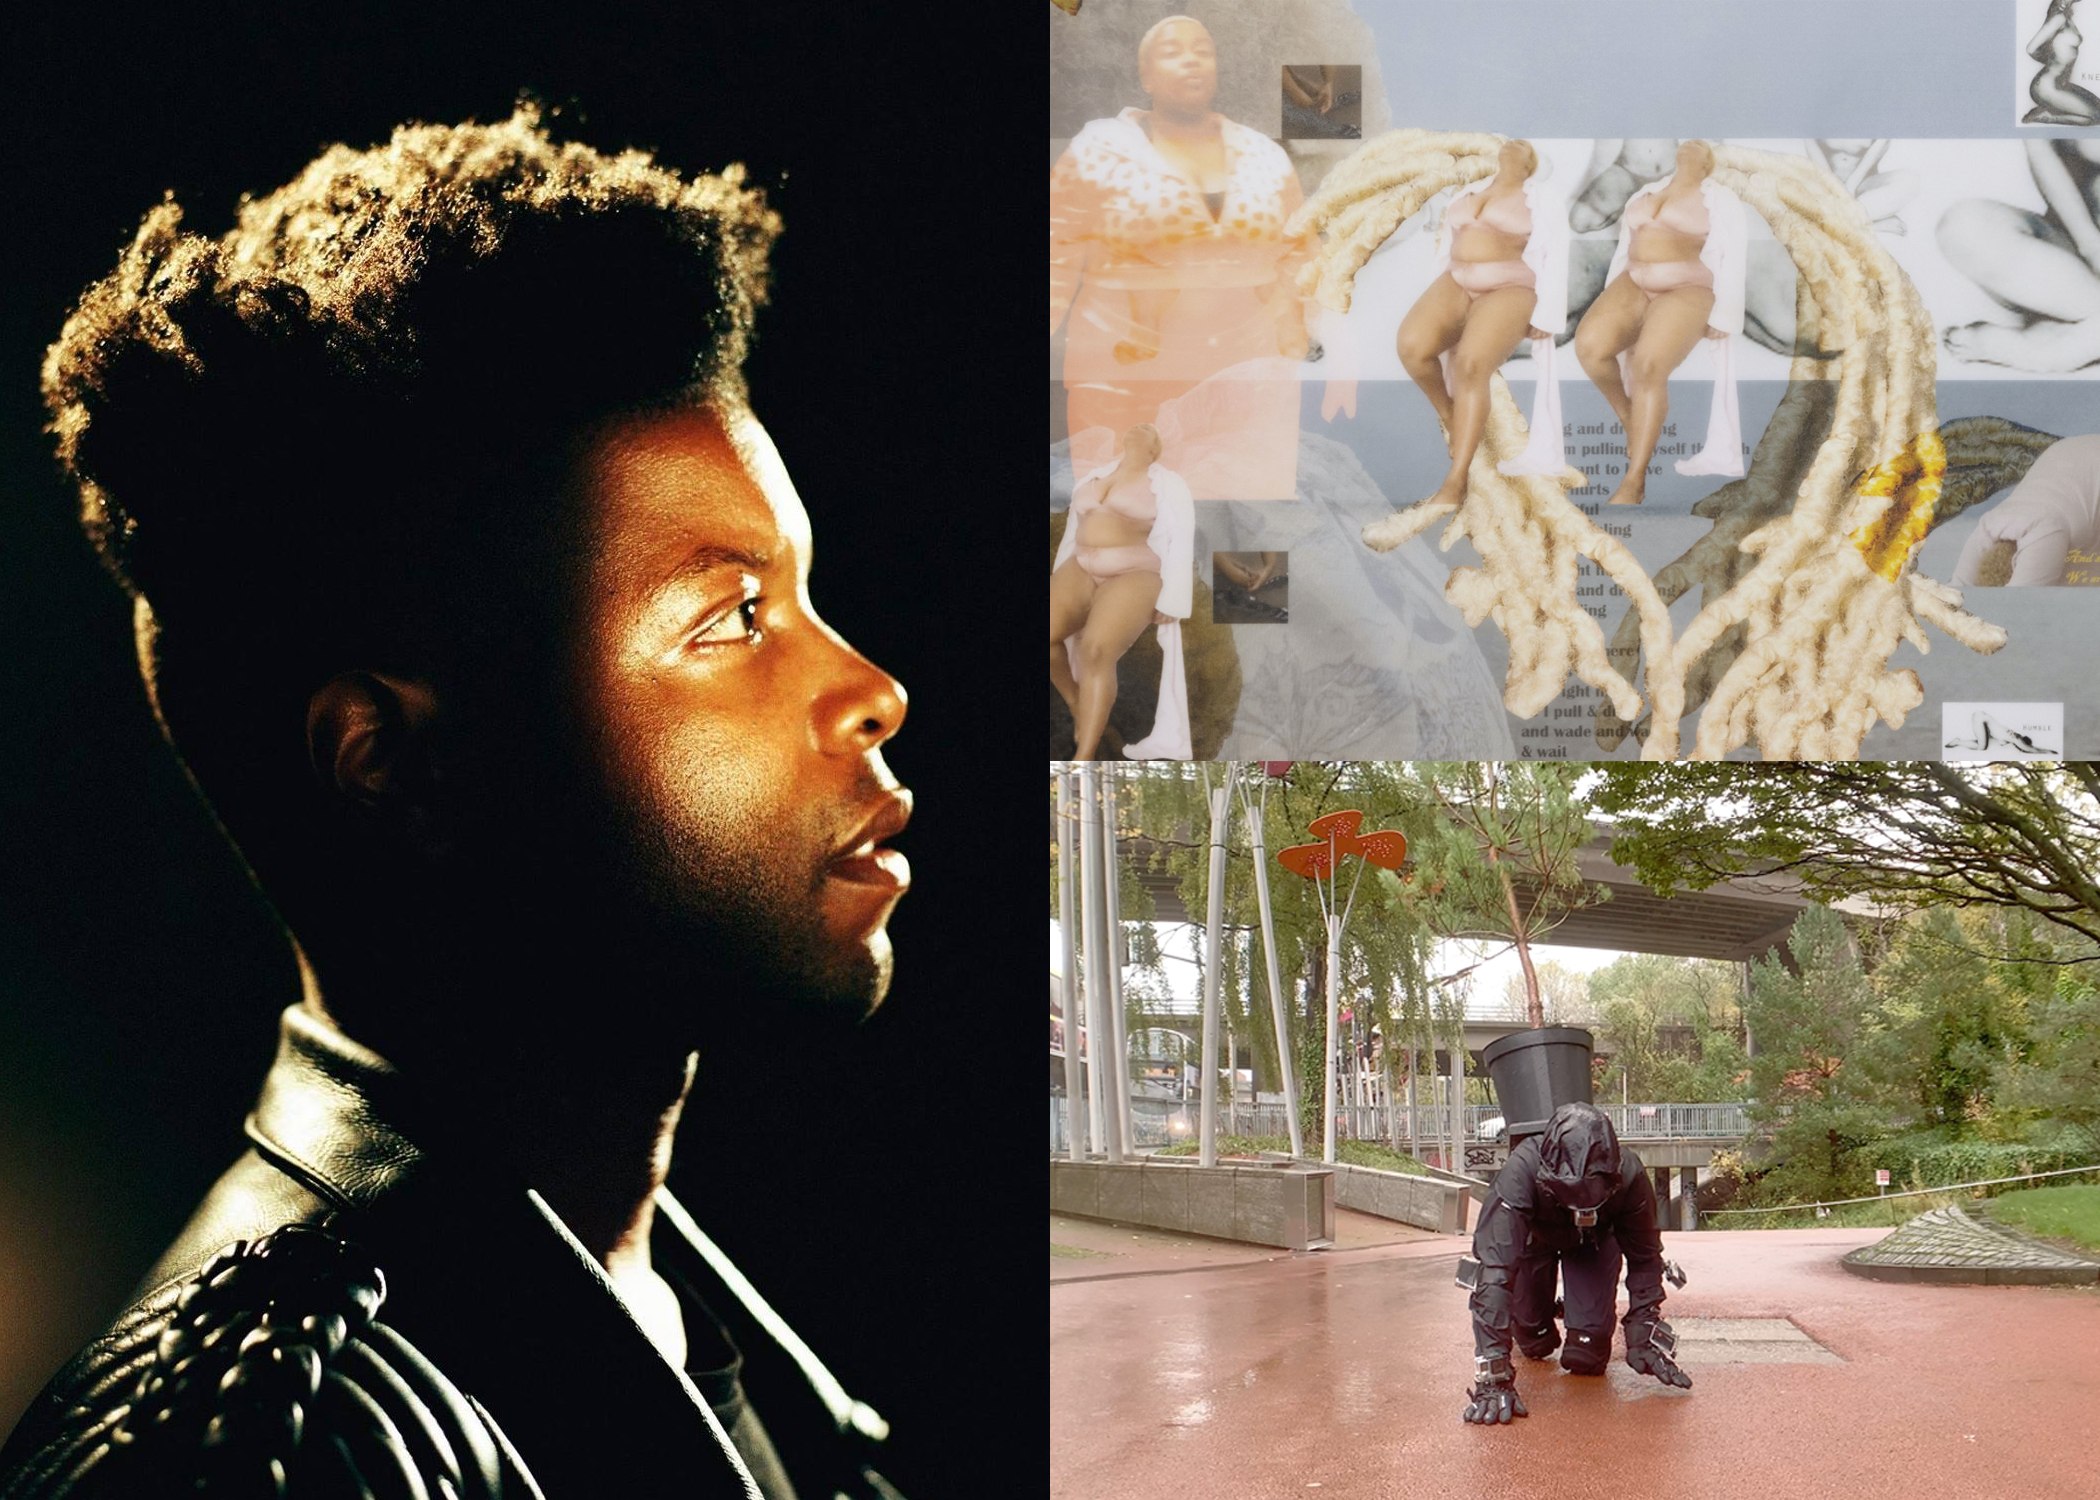 A collage comprised of three images. On the left is a portrait of Isaiah Lopaz. On the top right hand side is a collage image in cool tones by artist Madinnah Farhannah Thompson. On the bottom right hand side is an image of artist Miranda Whall crawling on the ground with a tree on her back